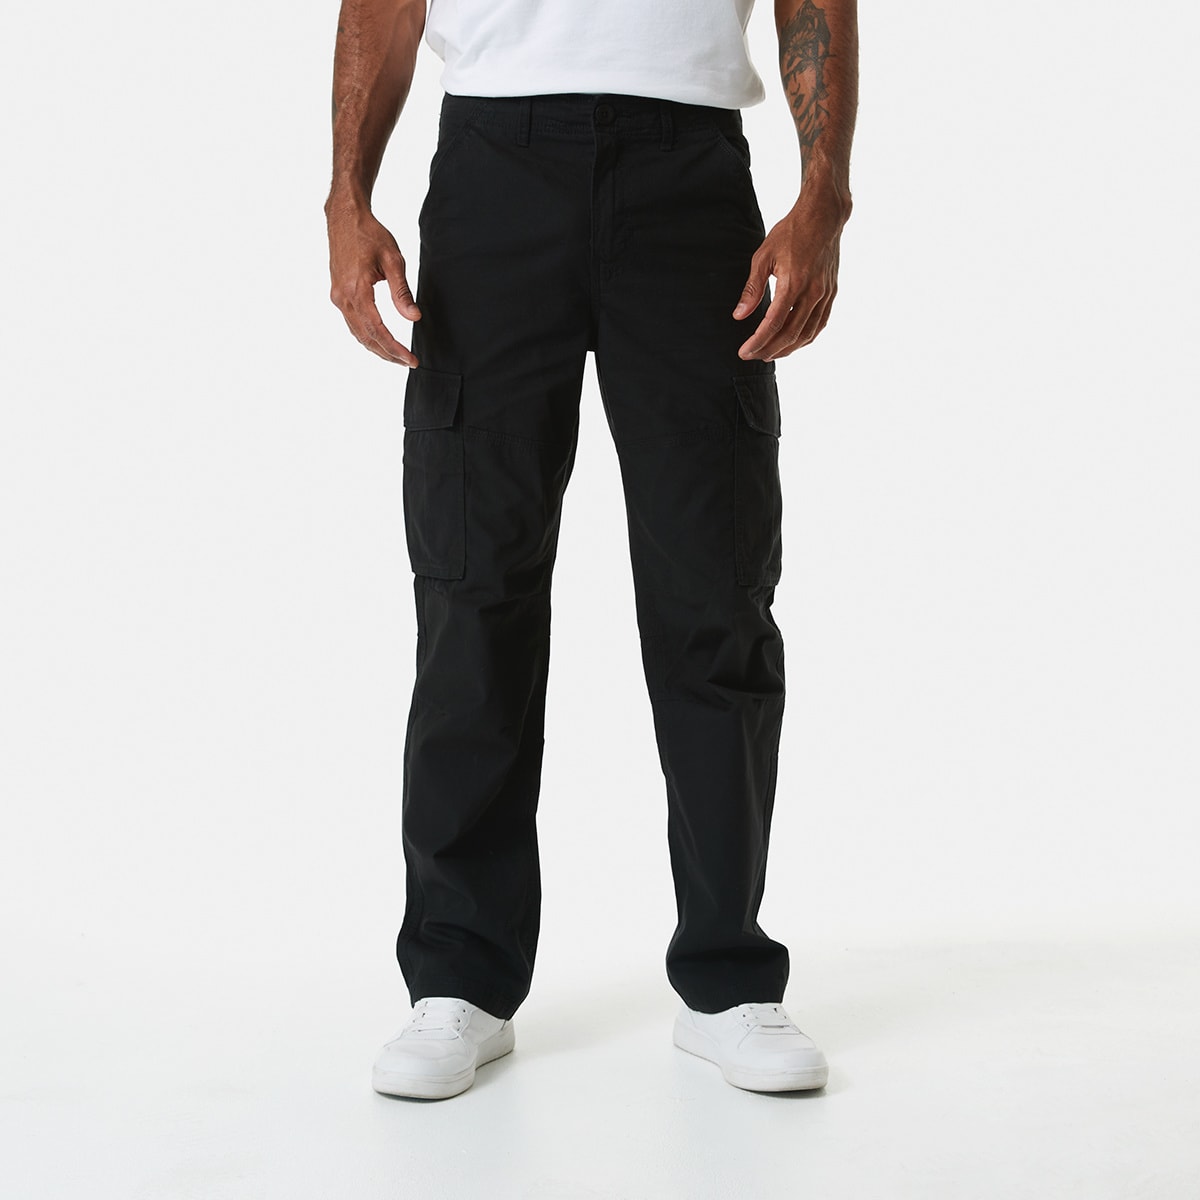 MENS STRAIGHT FIT WITH MESH CRICKET TRACKPANTS IVORY 100 WHITE